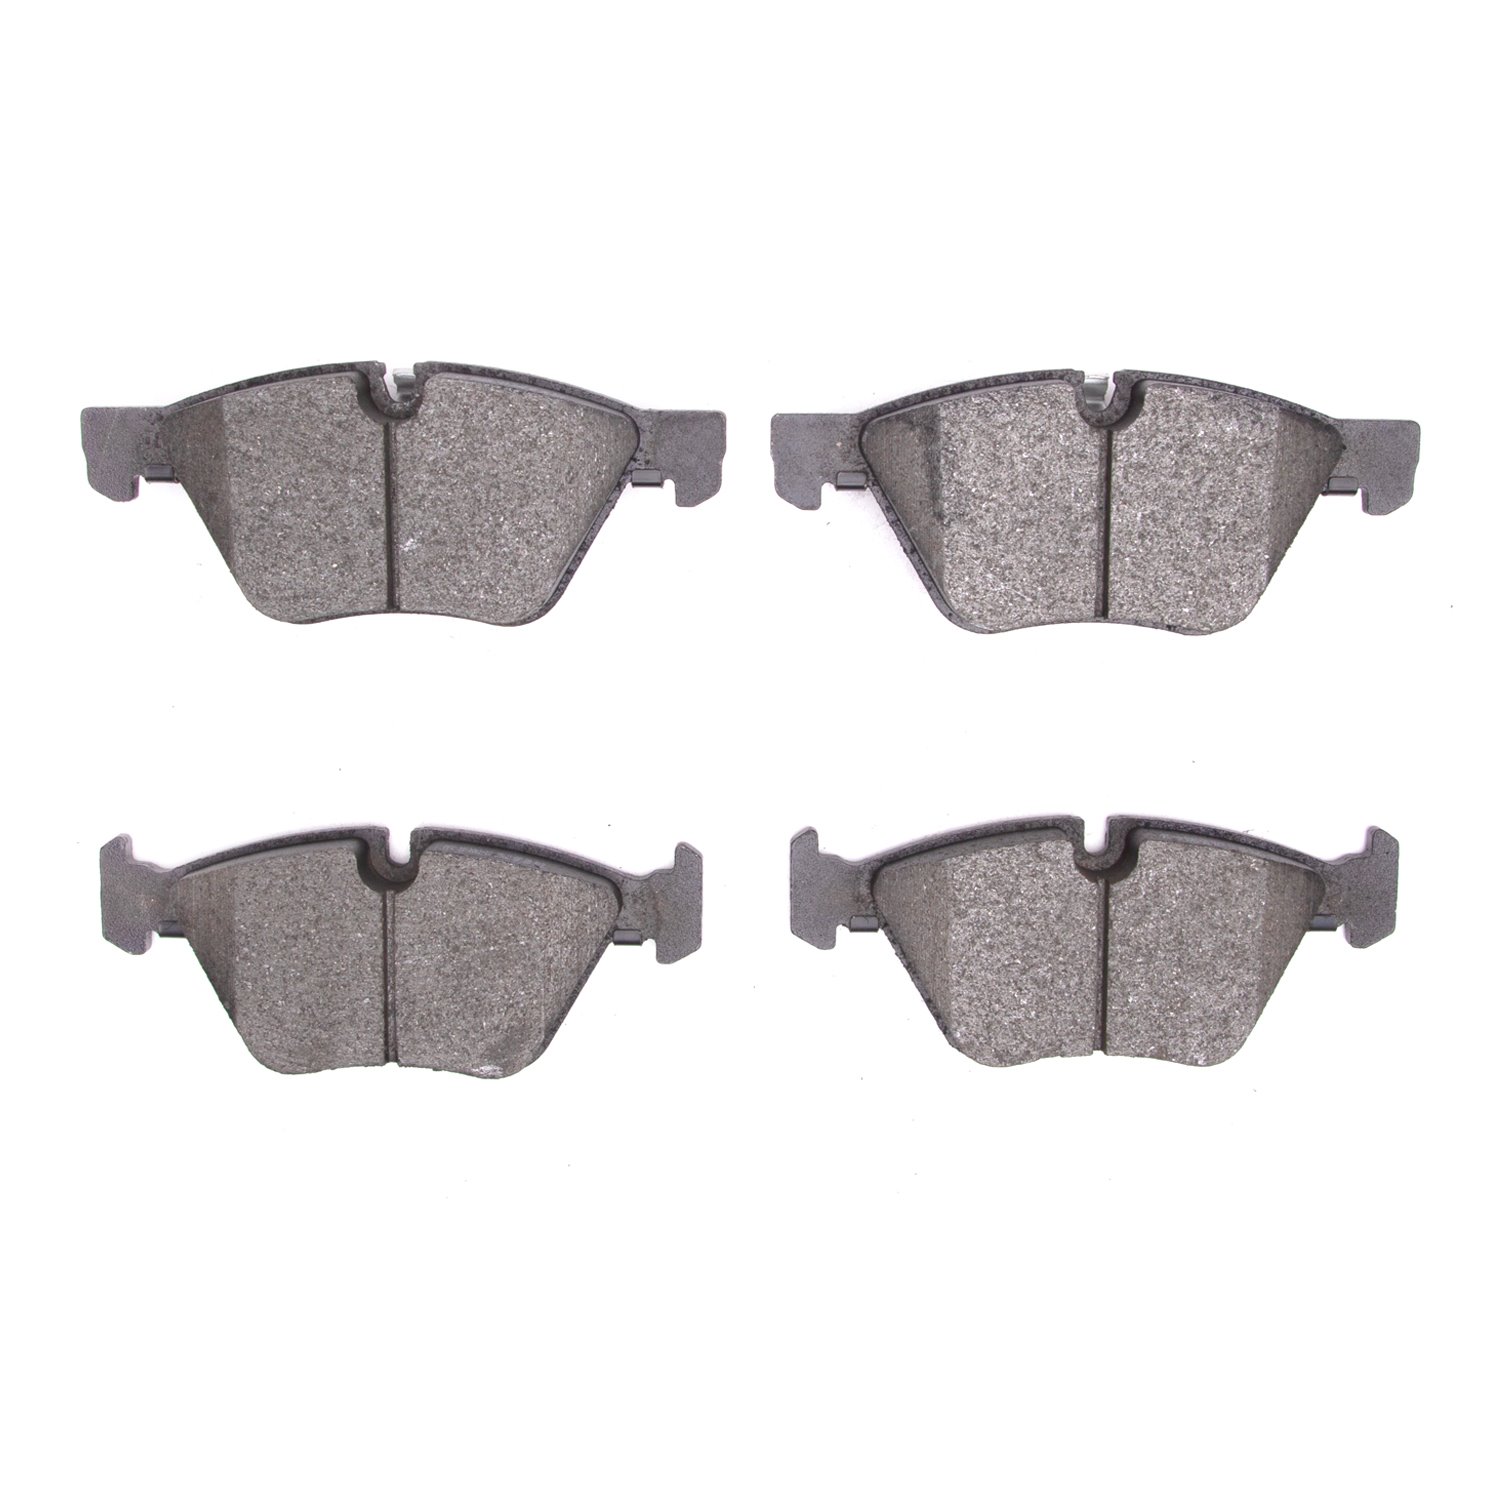 1310-1061-00 3000-Series Ceramic Brake Pads, Fits Select BMW, Position: Front